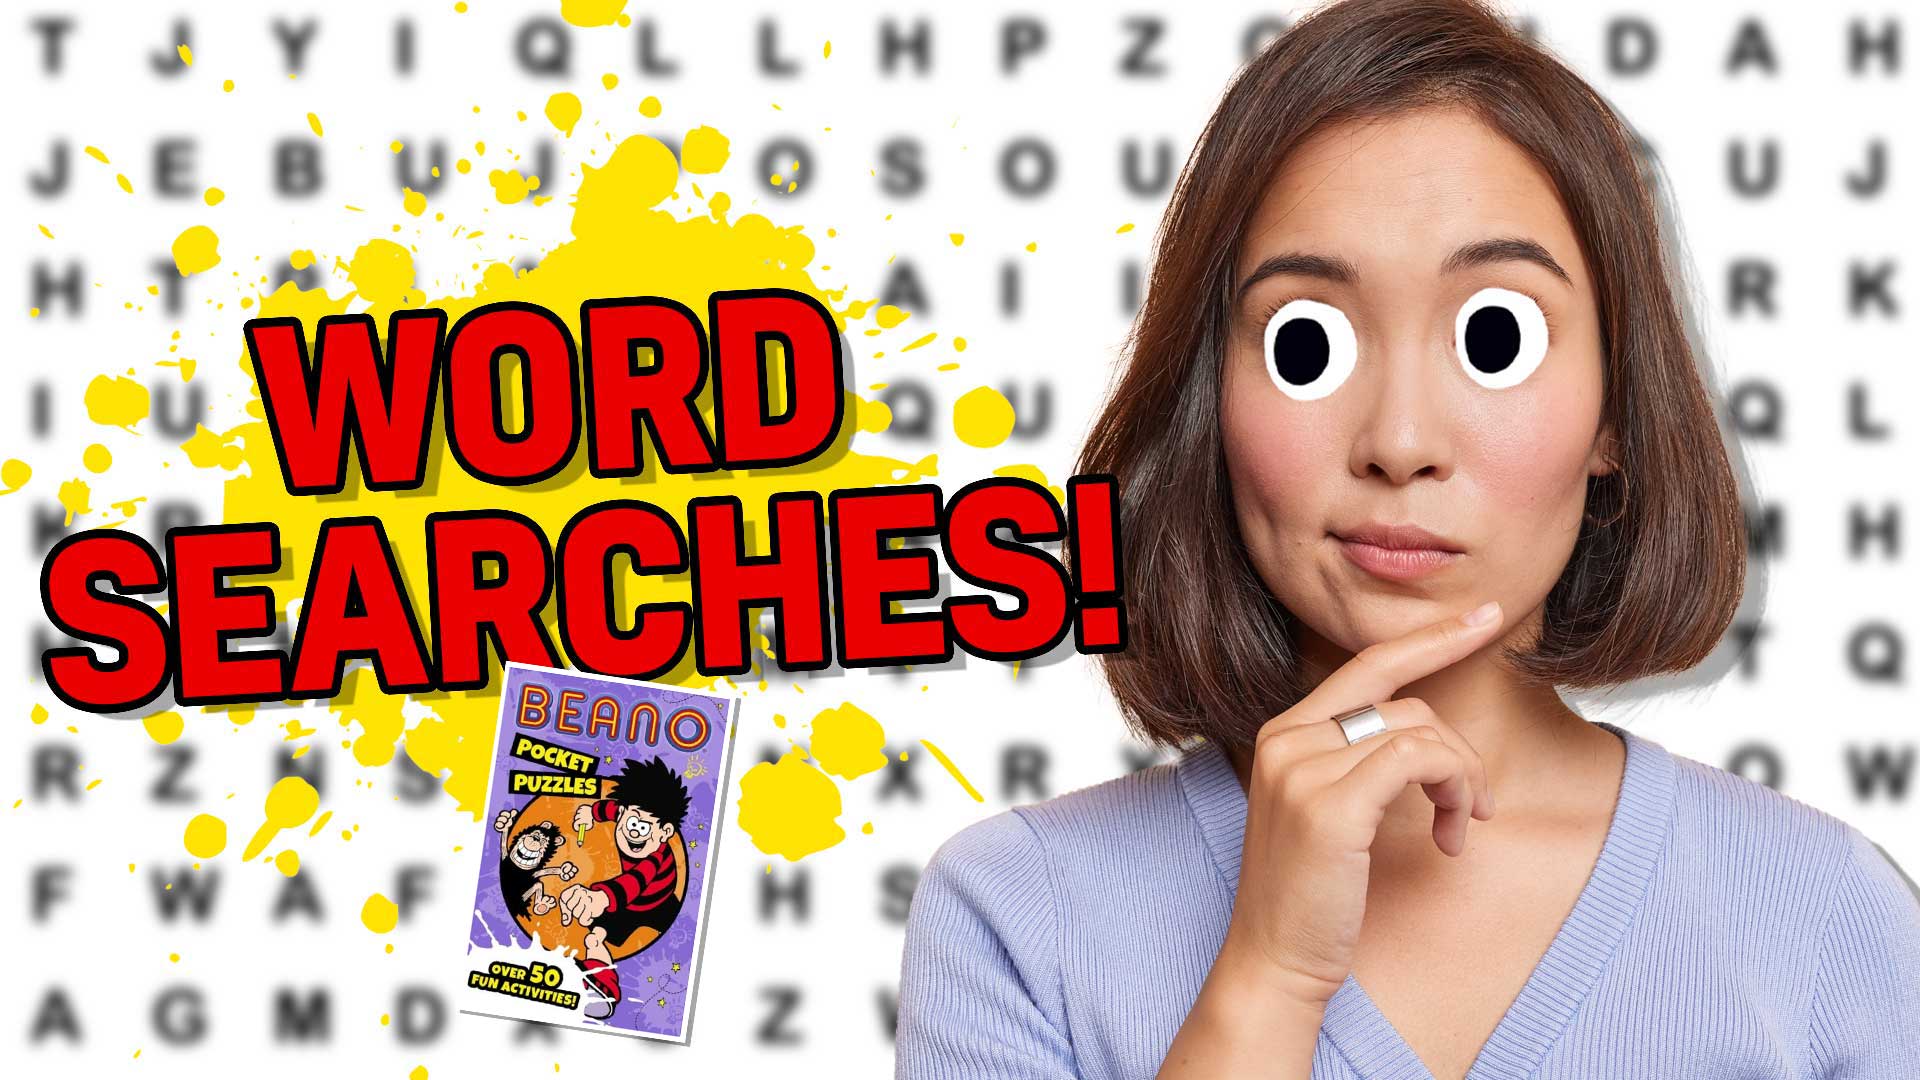 Result: Word Searches